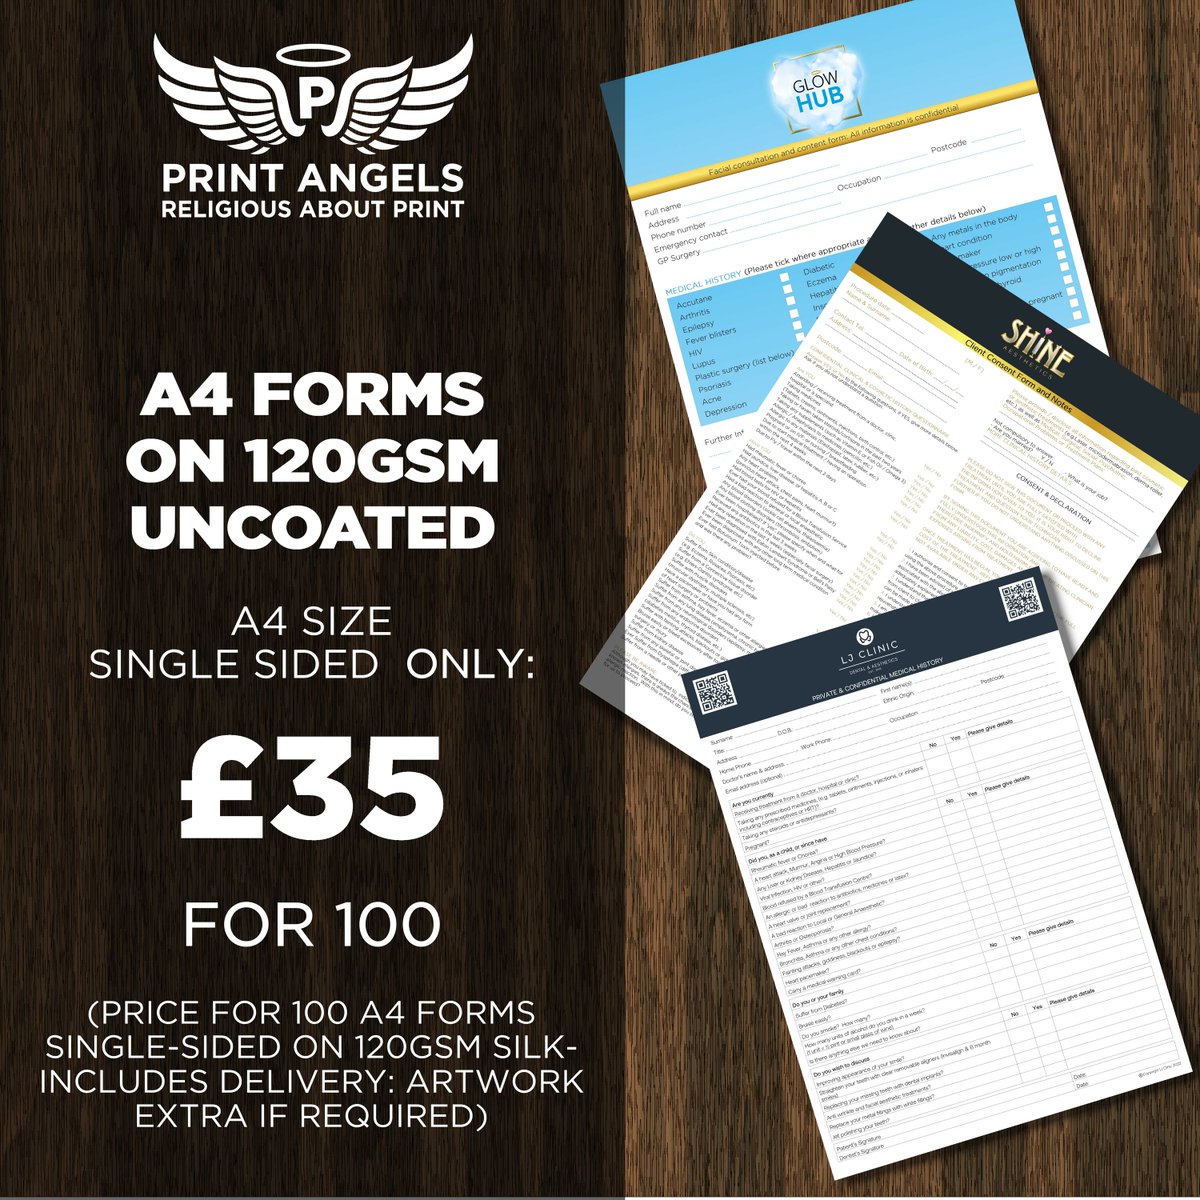 A4 FORMS ON 120GSM UNCOATED A4 SIZE SINGLE SIDED  ONLY: £35 FOR 100 
(PRICE FOR 100 A4 FORMS  SINGLE-SIDED ON 120GSM SILK- INCLUDES DELIVERY: ARTWORK EXTRA IF REQUIRED) #graphicdesigndaily #graphicdesign #worldwidedesigner #bespokedesigns #giftvoucherdesign #printingservices #spe